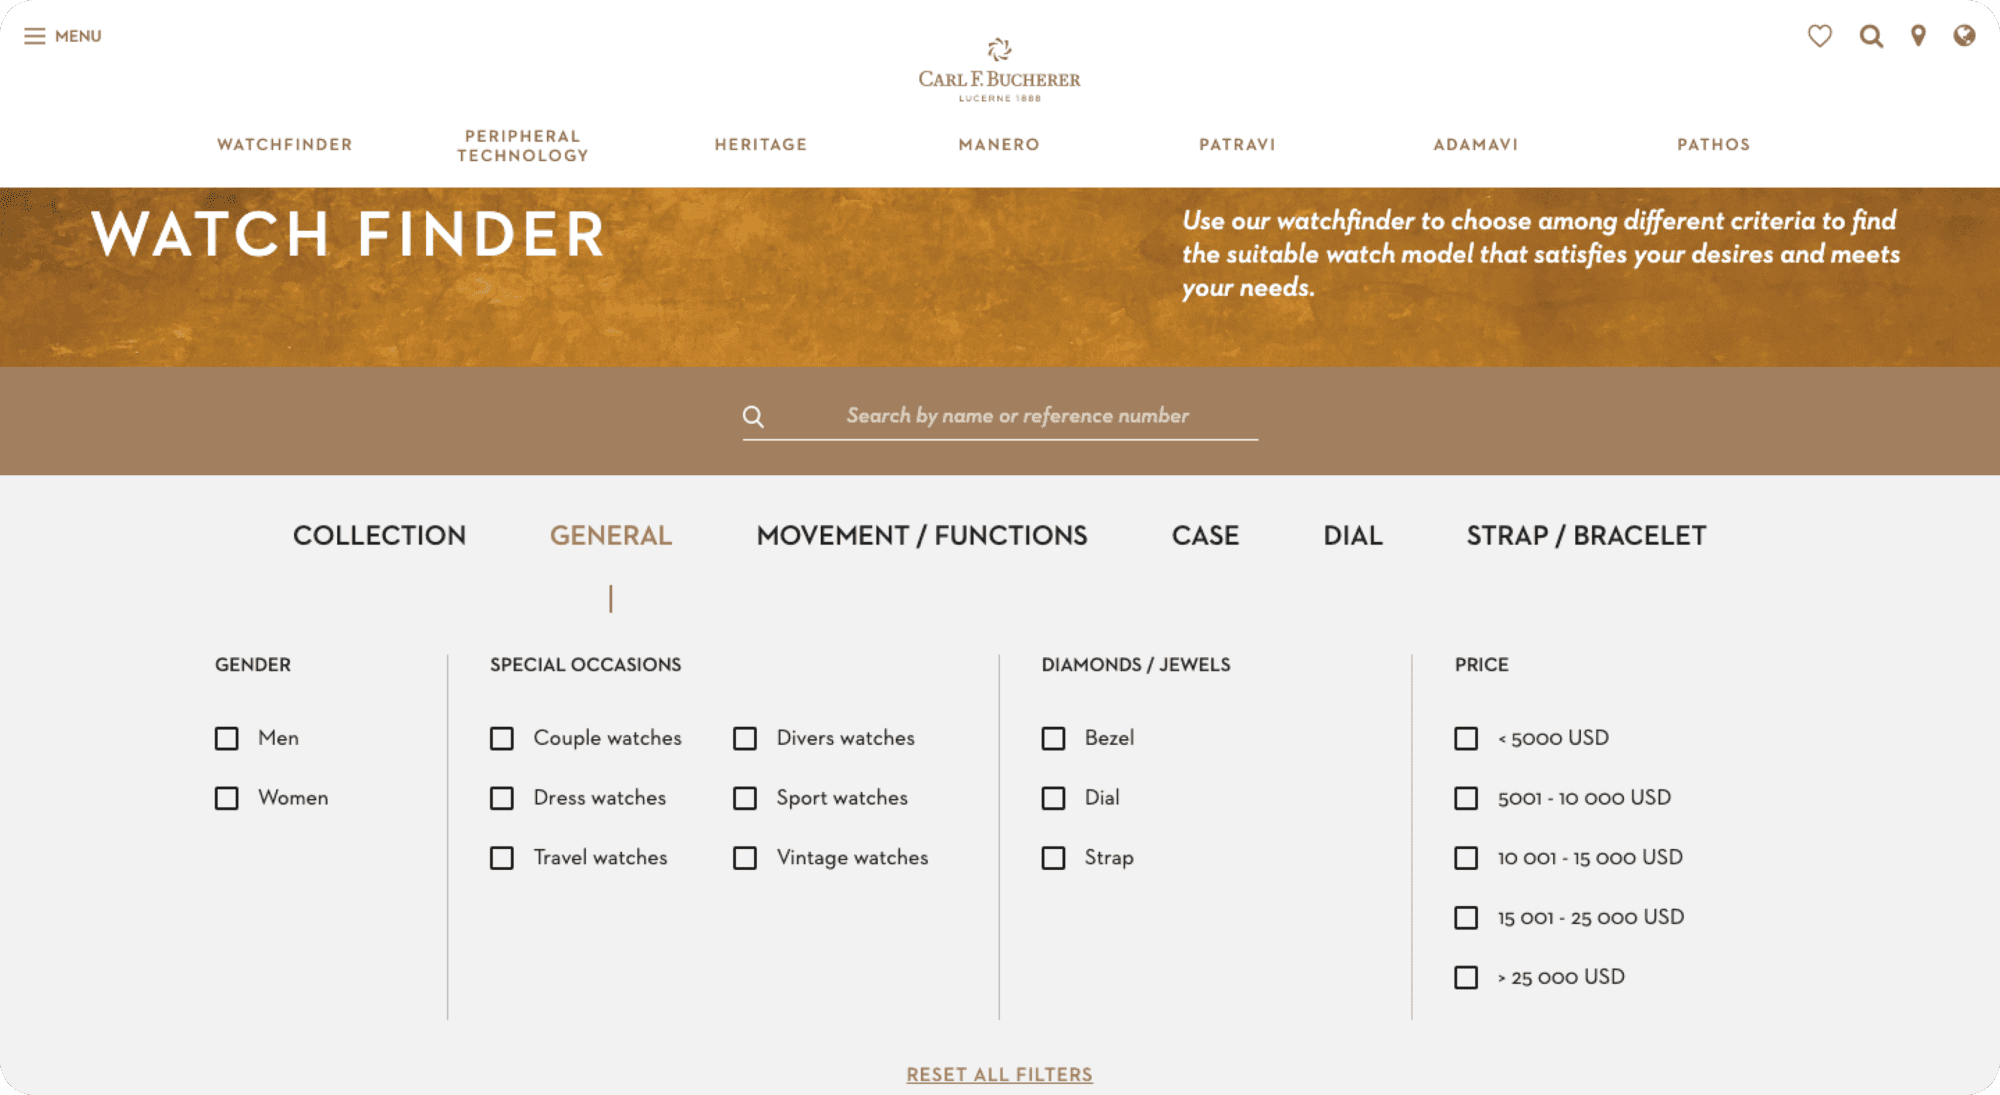 ITC's past client Carl F. Bucherer's website has an excellent search function that helps customers easily navigate and find what they want